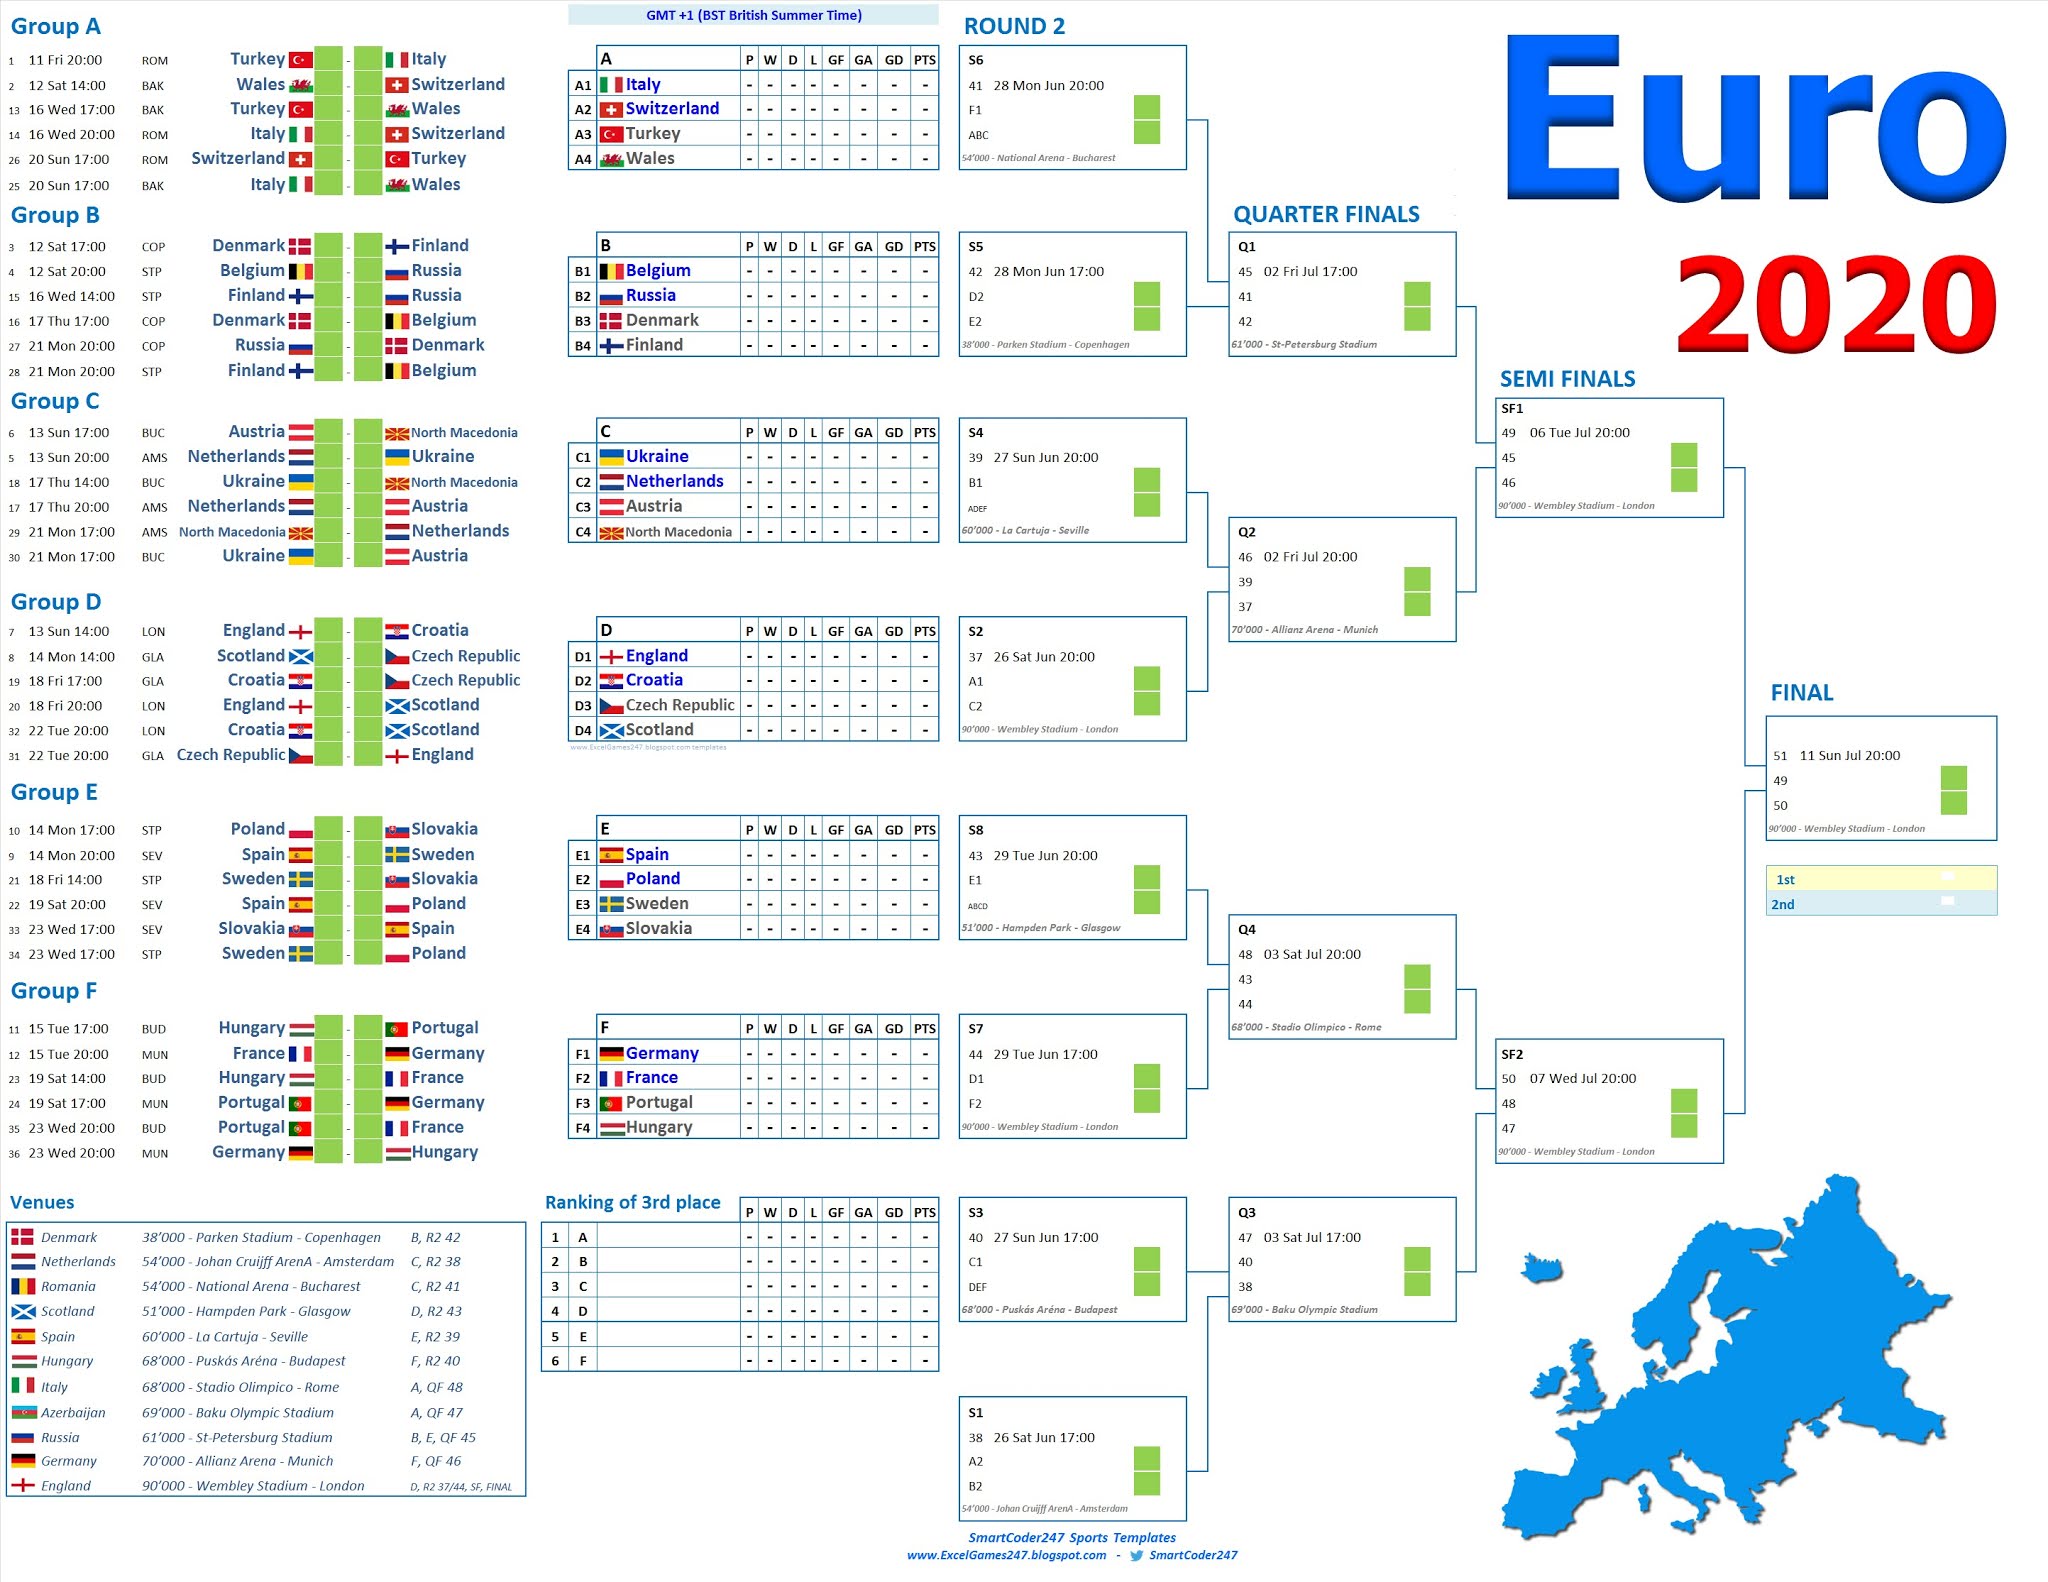 Smartcoder 247 - Euro 2020 Football Wallcharts and Excel Templates